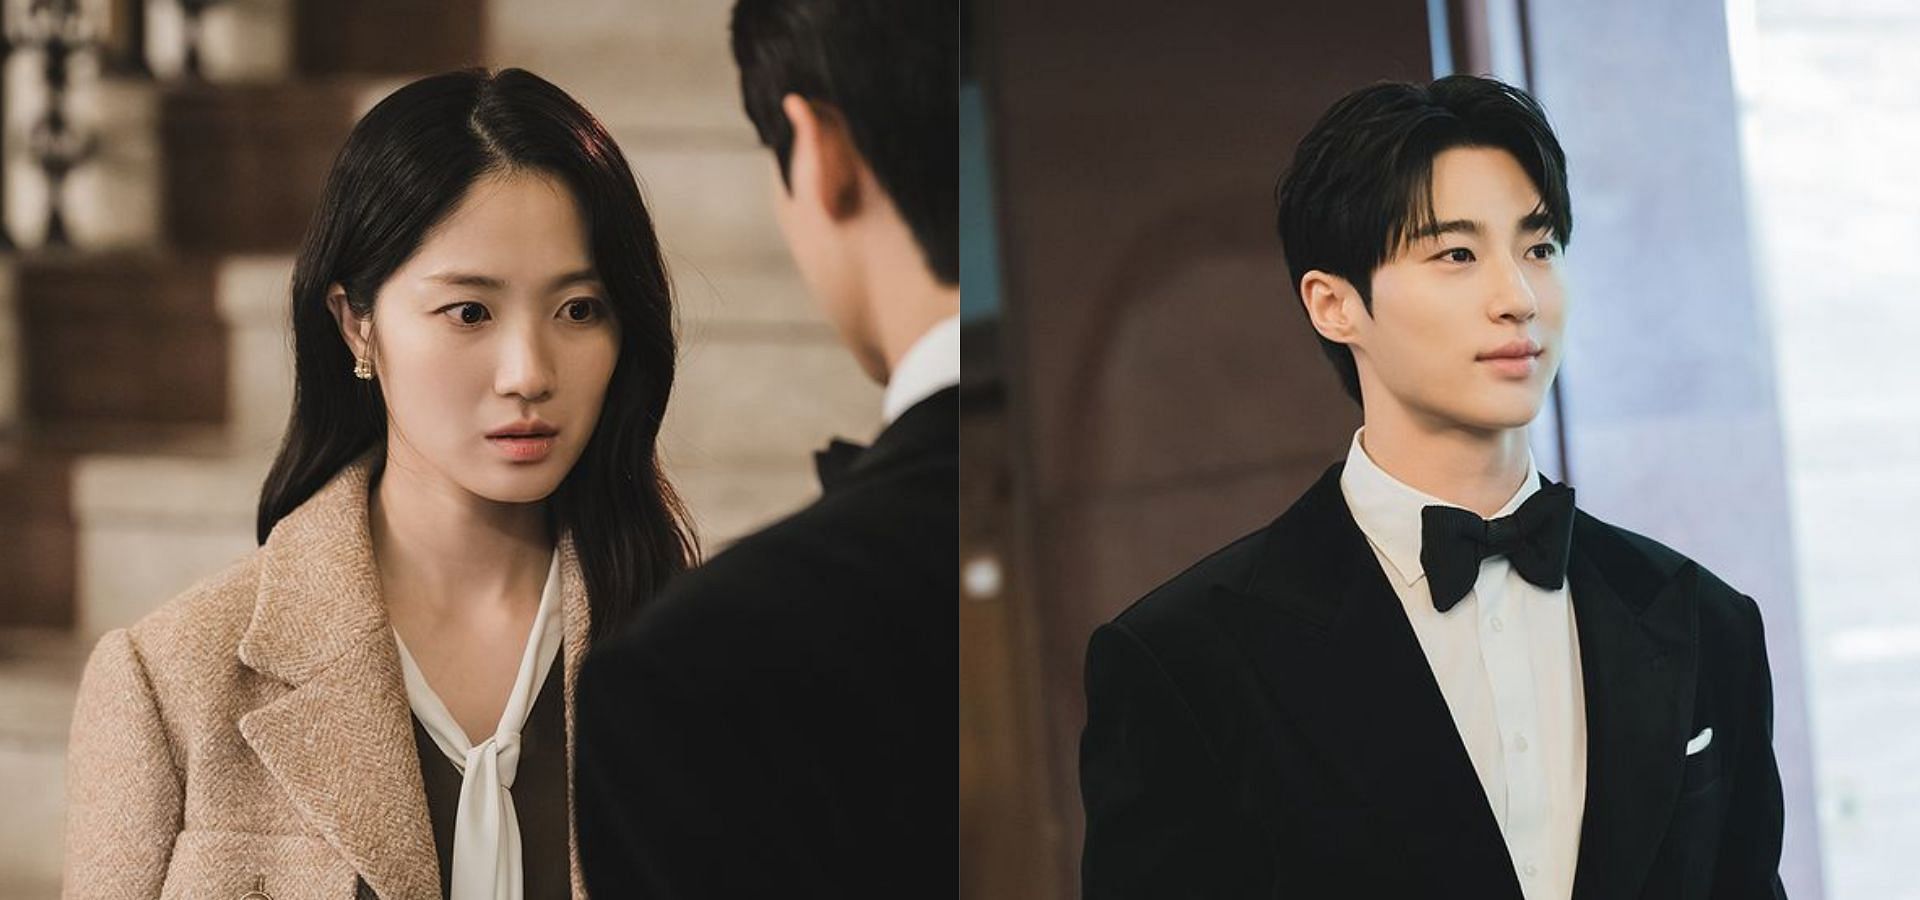 Lovely Runner still cuts featuring Kim Hye-yoon and Byeon Woo-seok (Images Via Instagram/@tvn_drama) 